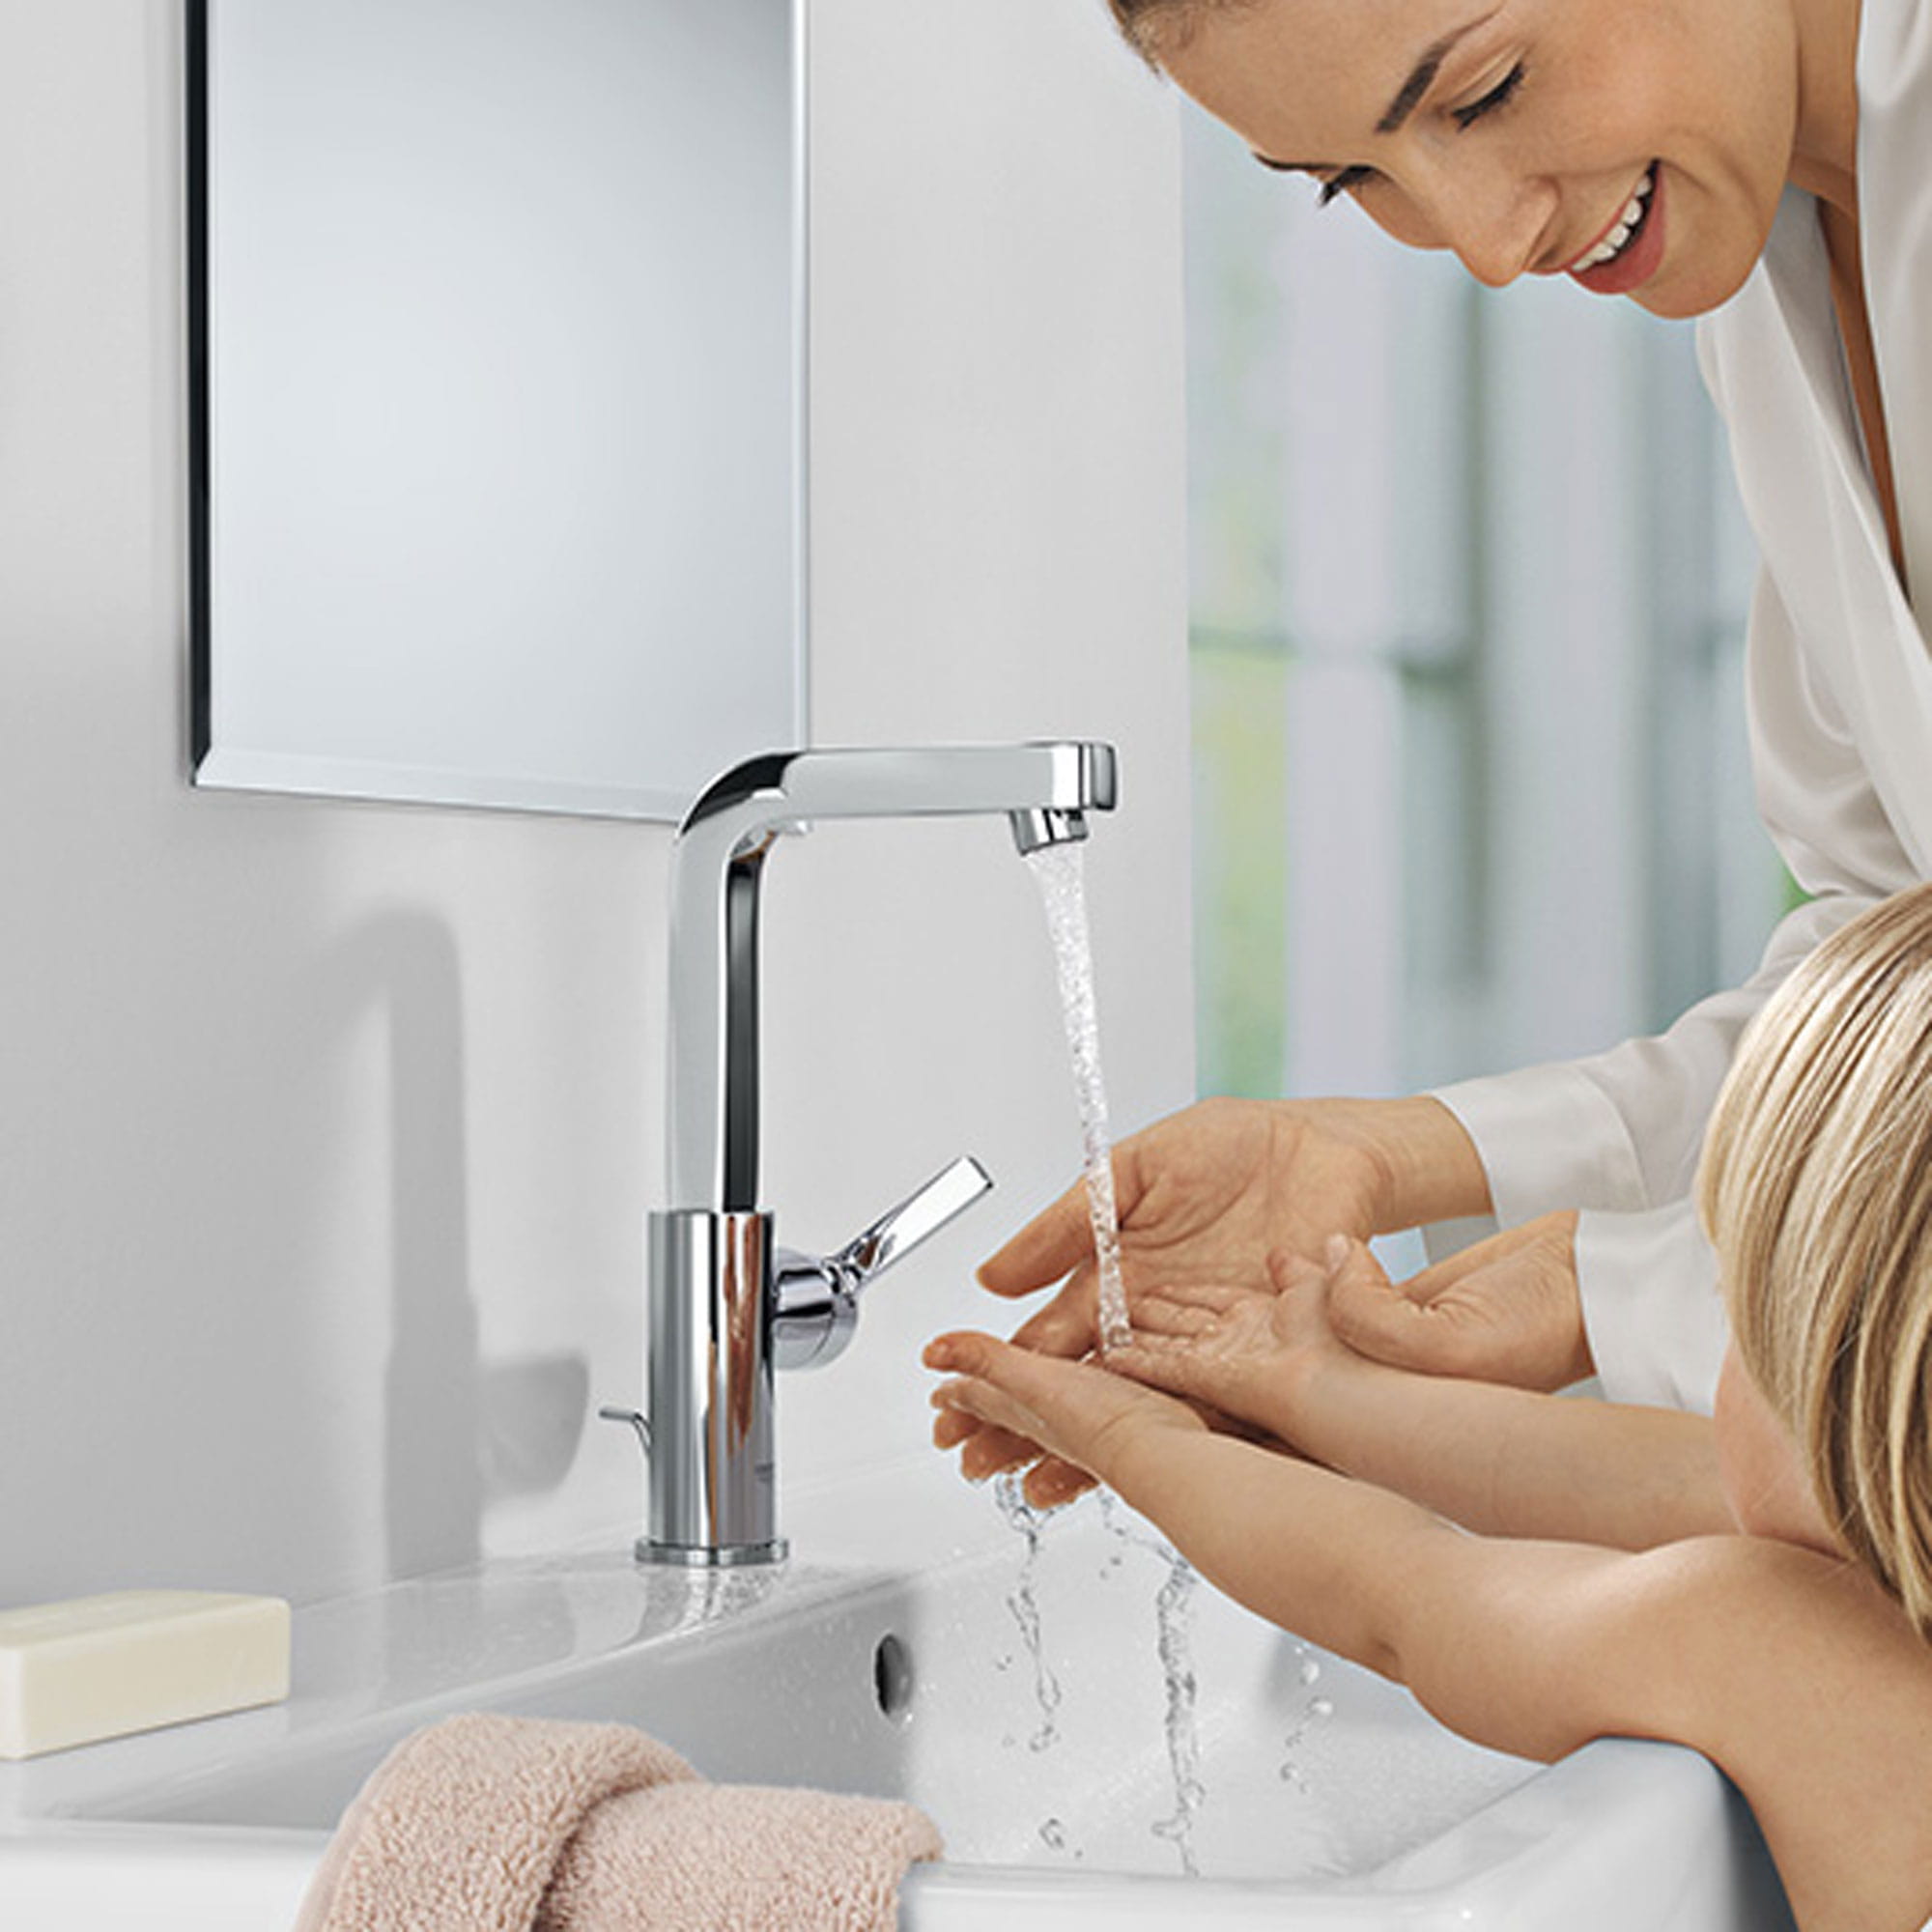 A women washing her and her child's hands under a grohe faucet.